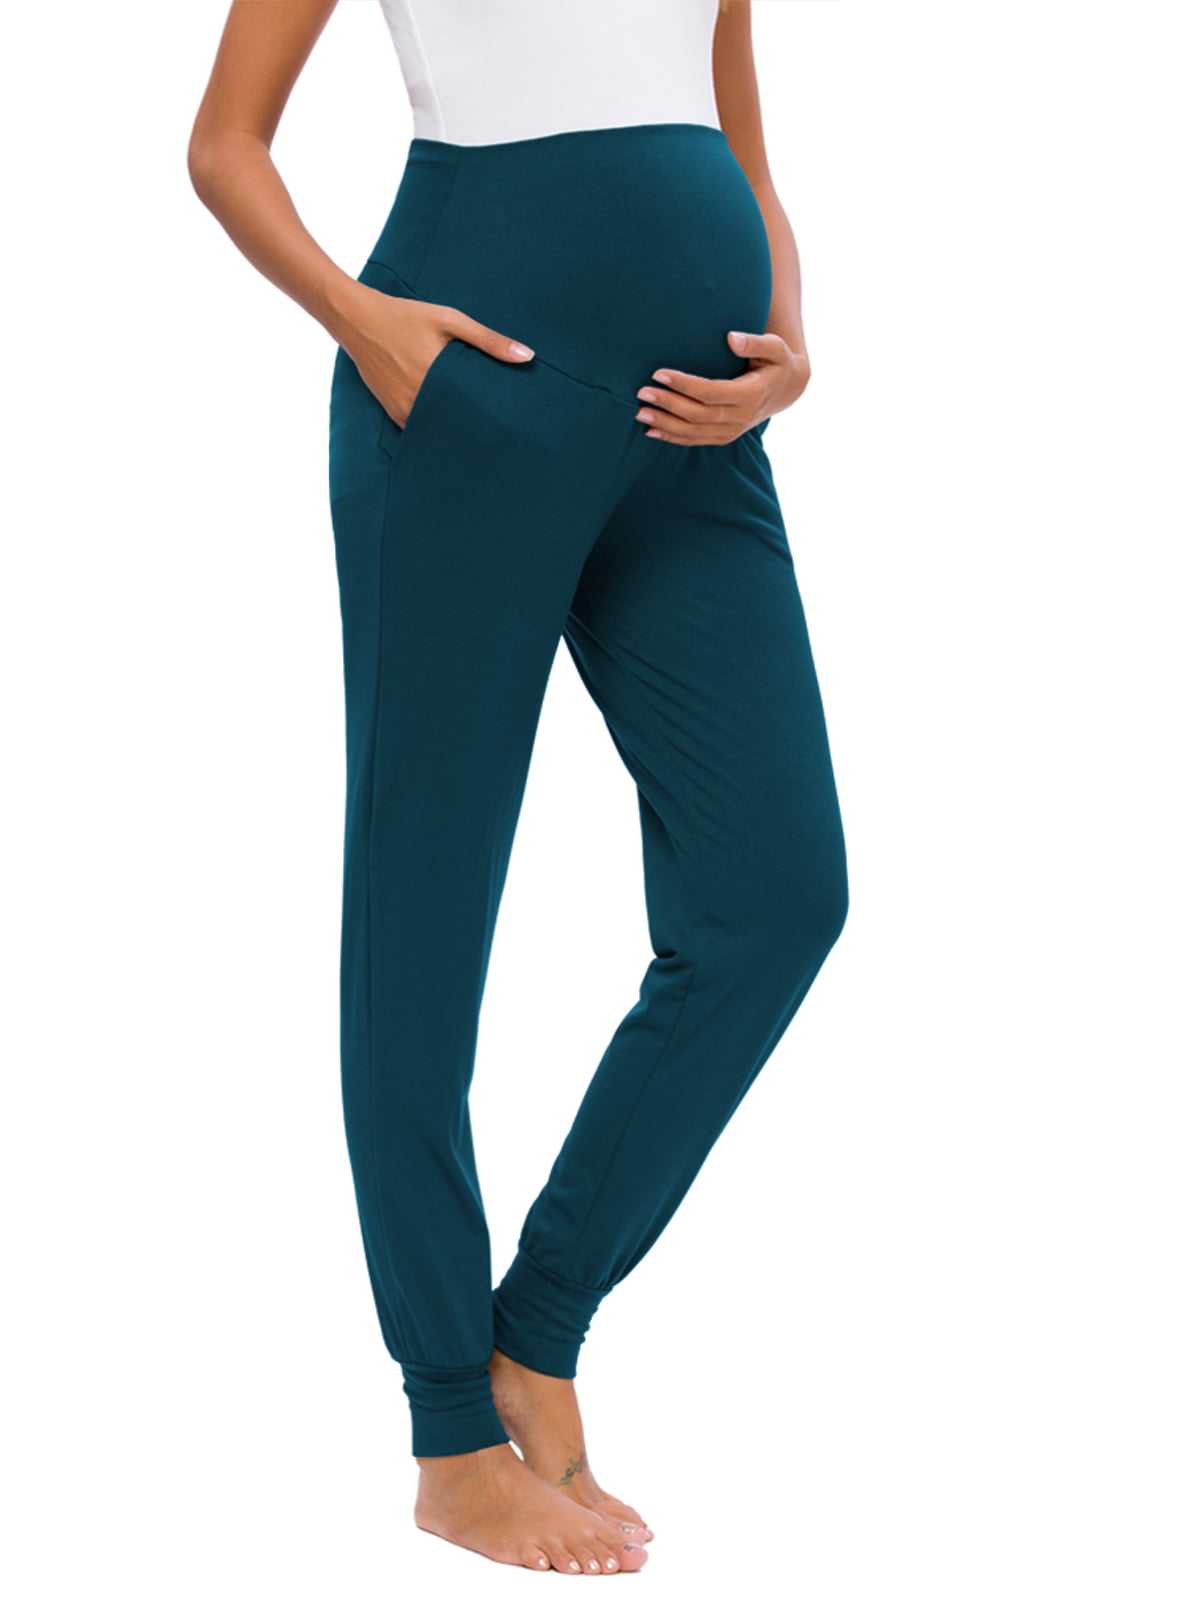 Ecavus Maternity Pants Casual Loose Ankle Pants Comfy Stretchy Pregnancy Yoga Pants with Pockets 